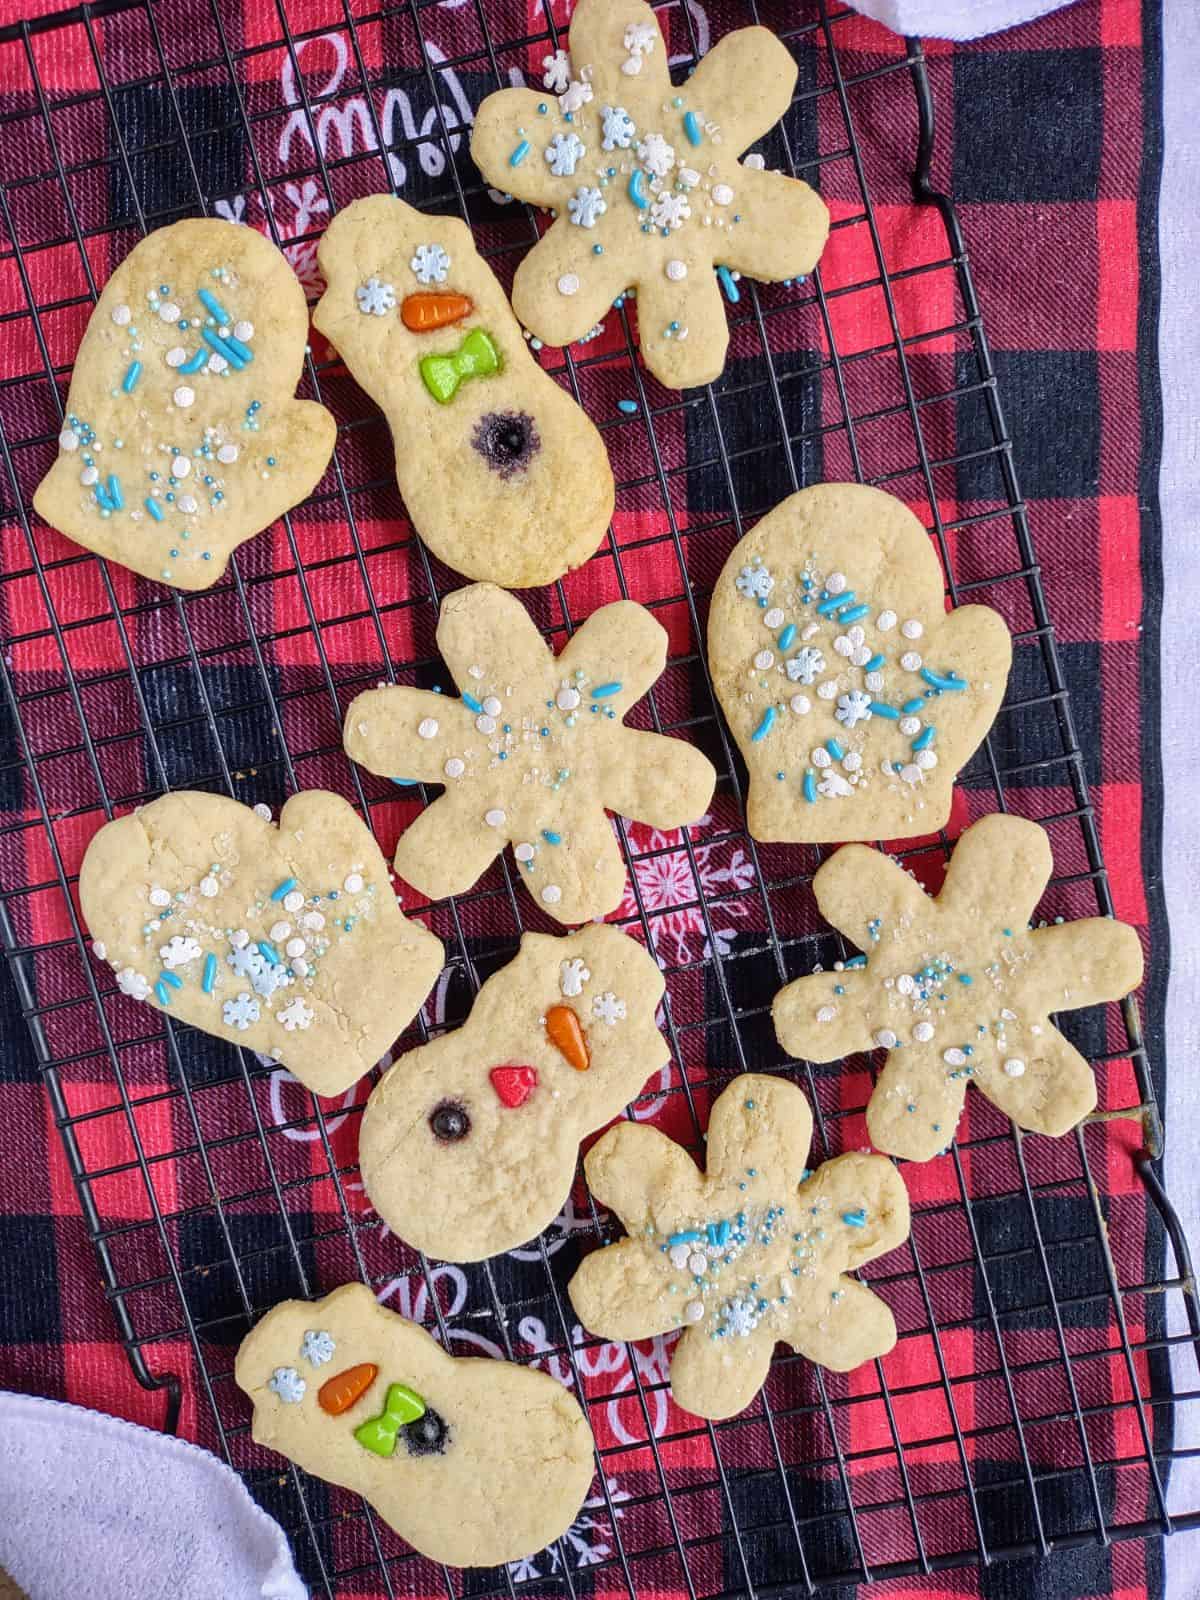 Decorated sugar cookies without frosting on a dry rack with a red plaid towel underneath.